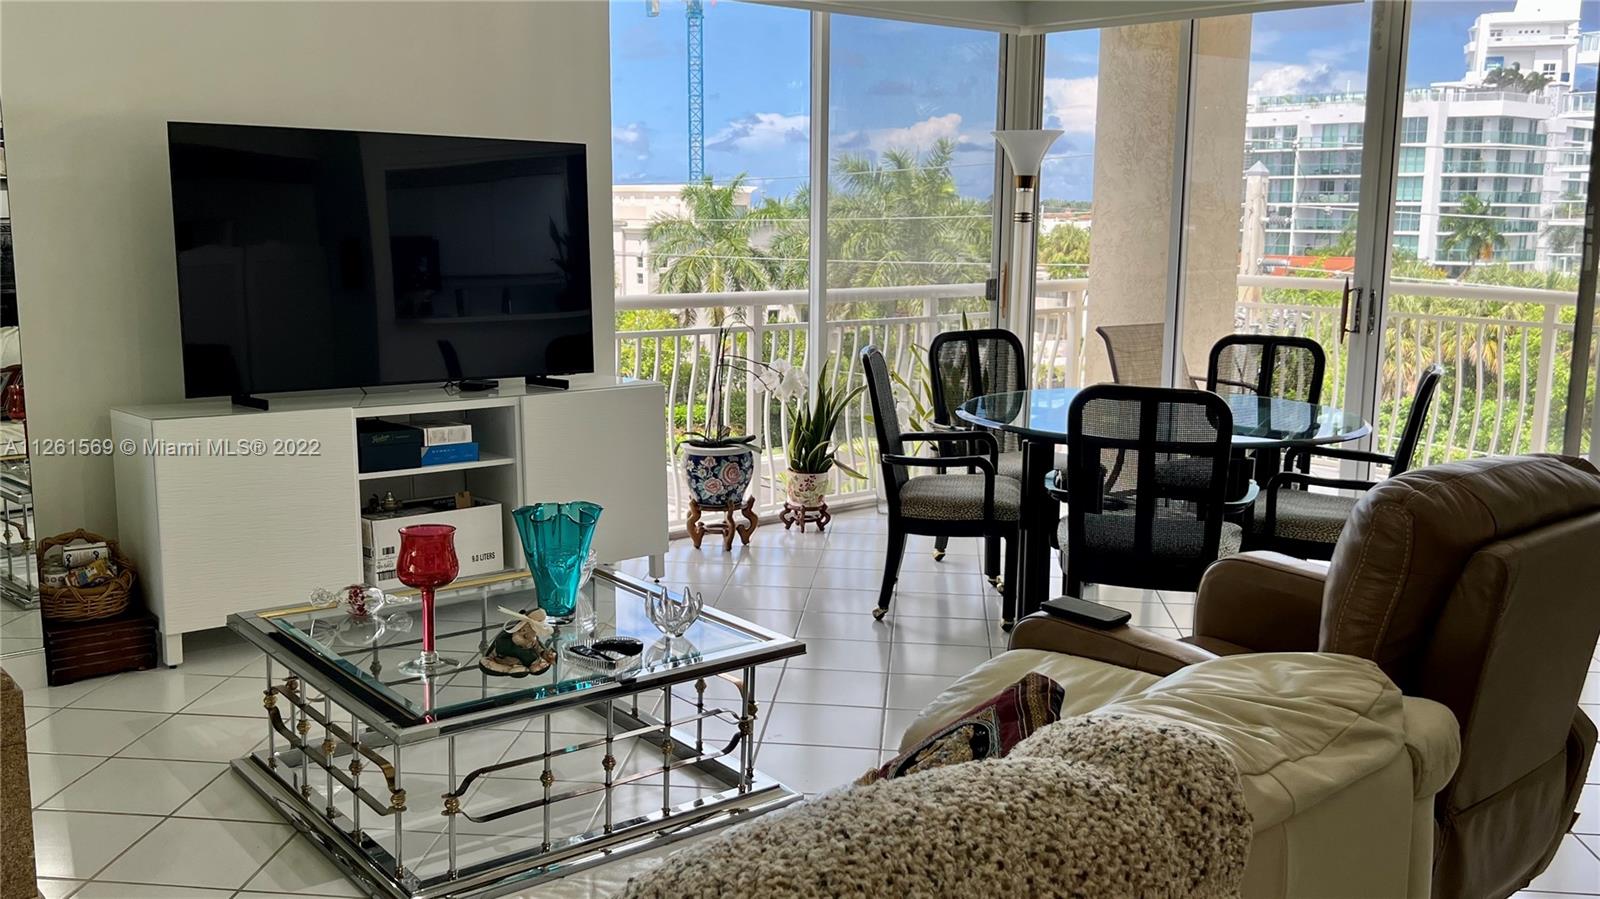 This spacious 2/2 corner unit in beautiful Bay Harbor Islands is located on the canal in a quiet boutique secured building. 2 deeded parking spots included. It features new carpet in the bedrooms, marble bathrooms, newer AC , refrigerator and much more. Shows very well with lots of natural light. In great condition !! Partial water views..Community pool overlooks the canal..Great location!! Walk to restaurants, shops, beaches and much more.."A" rated school district ..